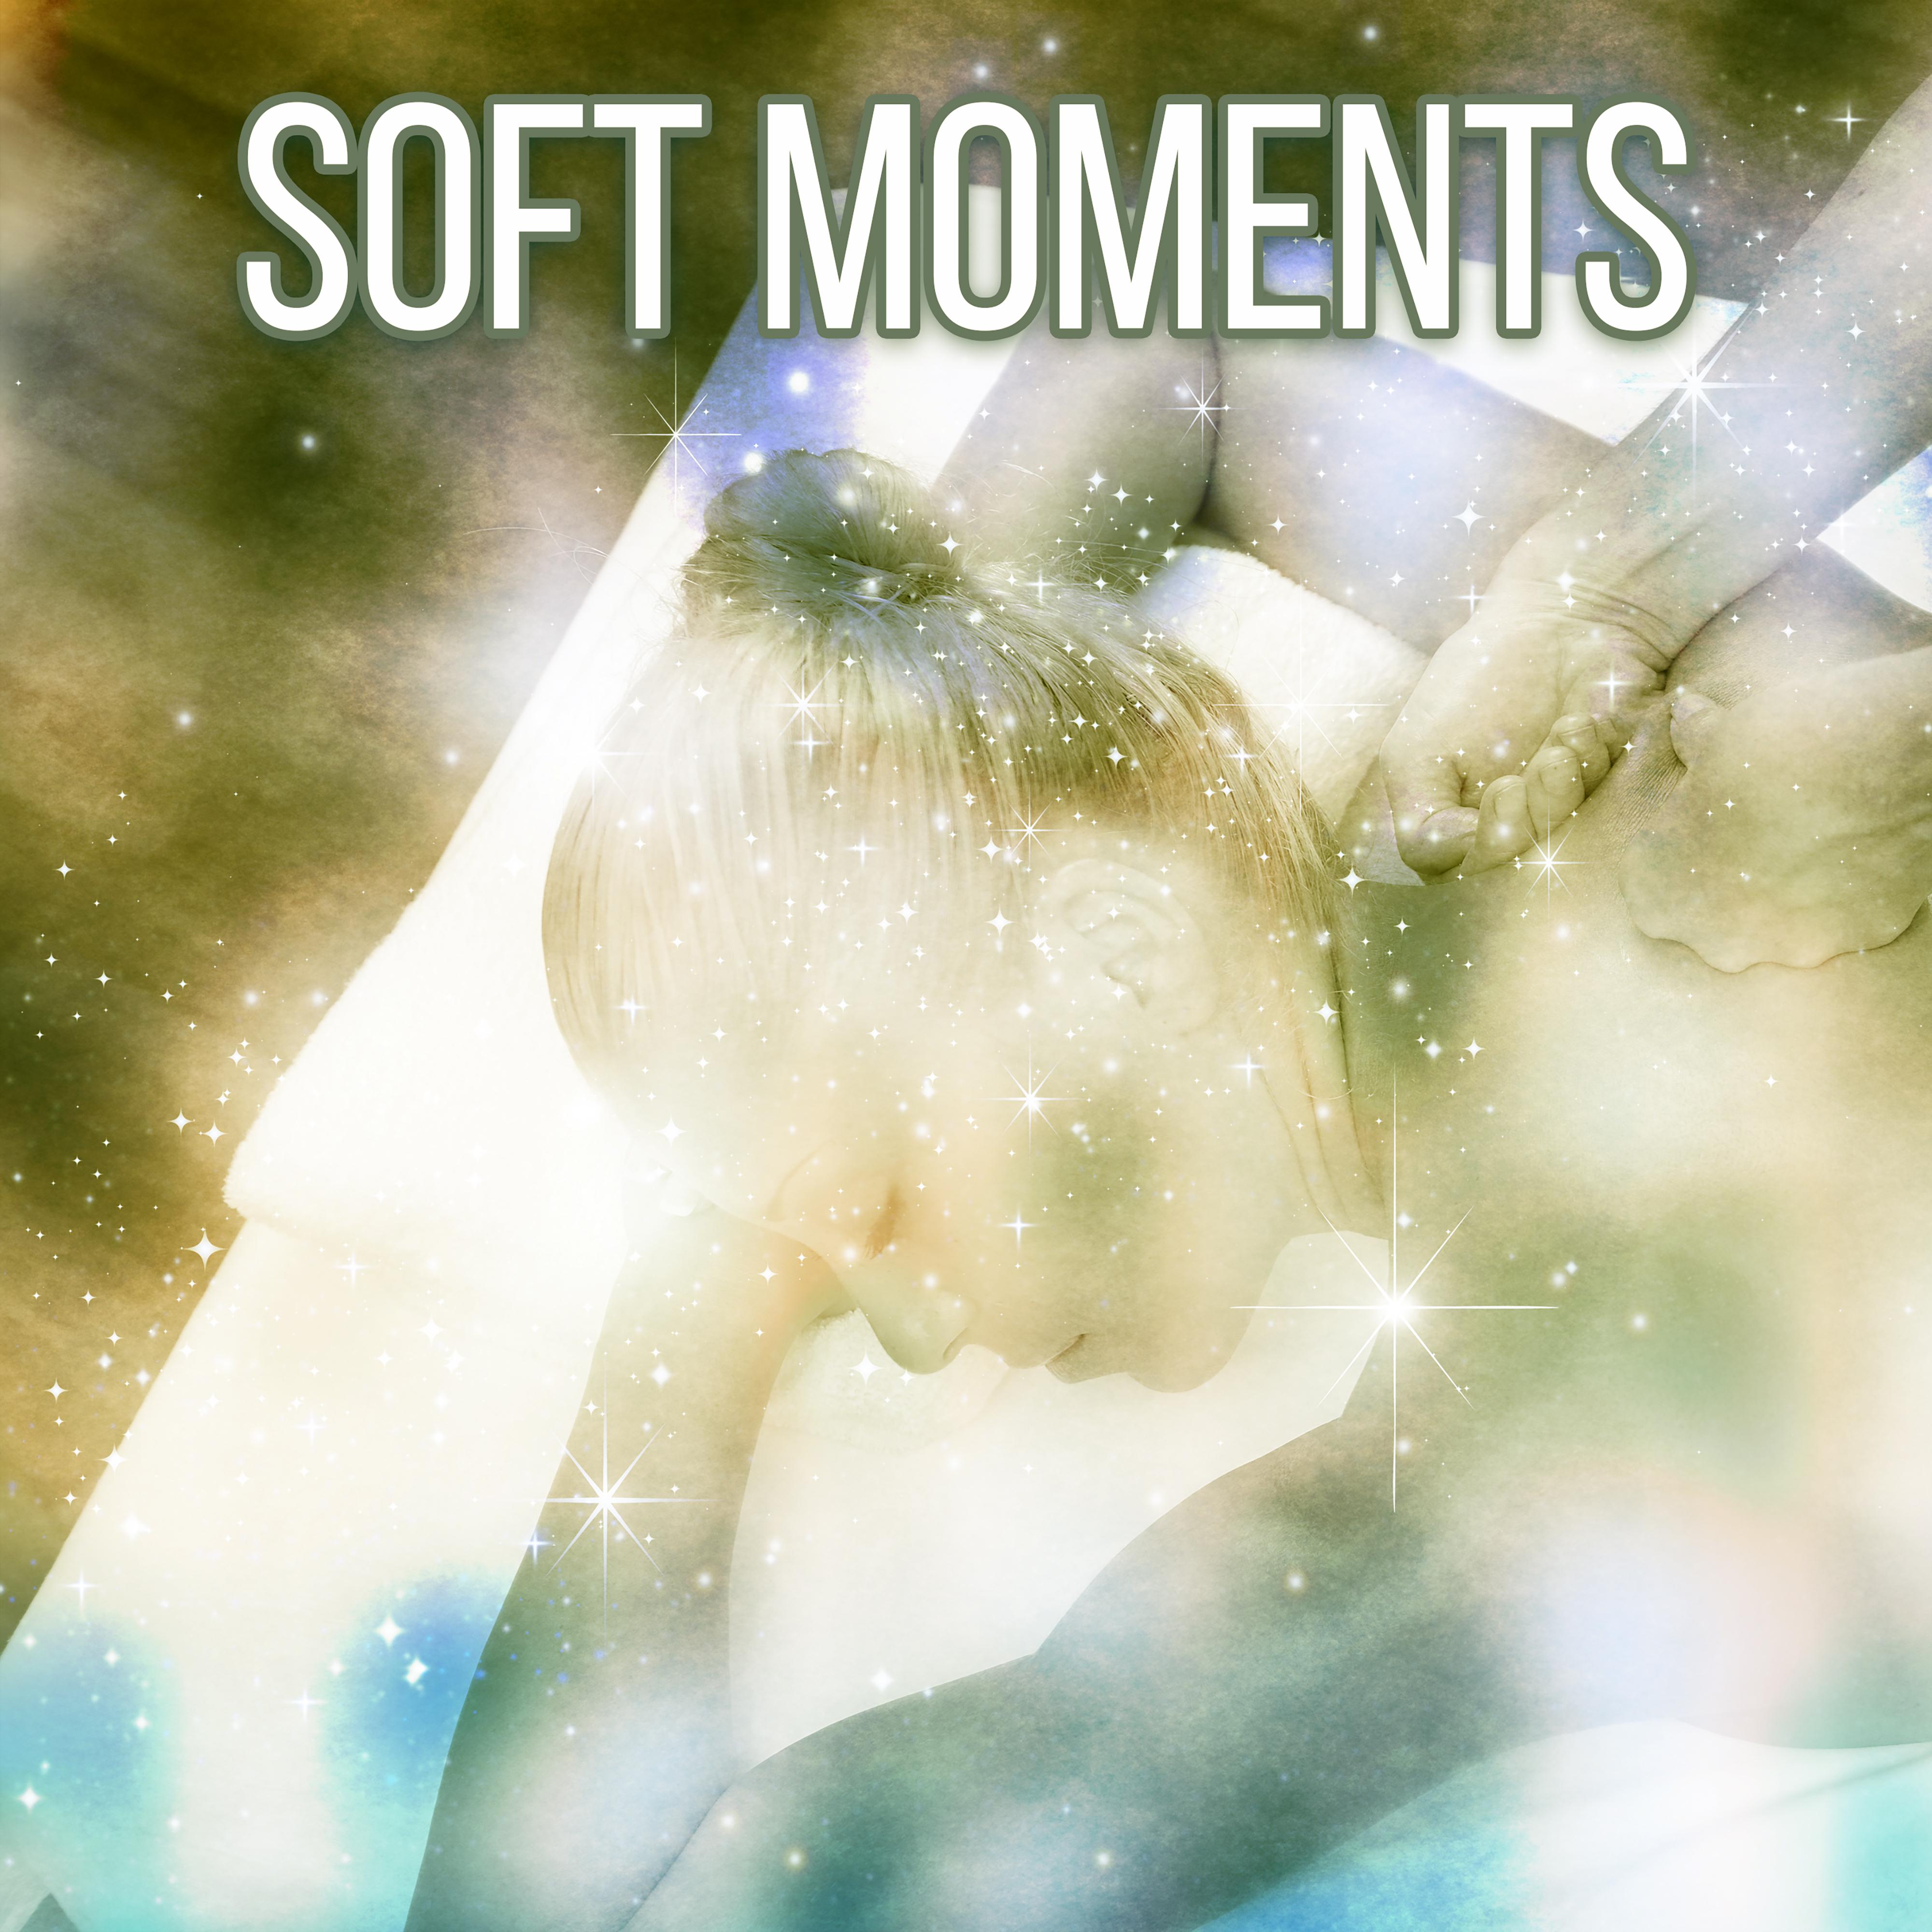 Soft Moments – Music for Spa, Relaxation Wellness, Beautiful Massage, Calmness, Spa Dreams, Peaceful Music